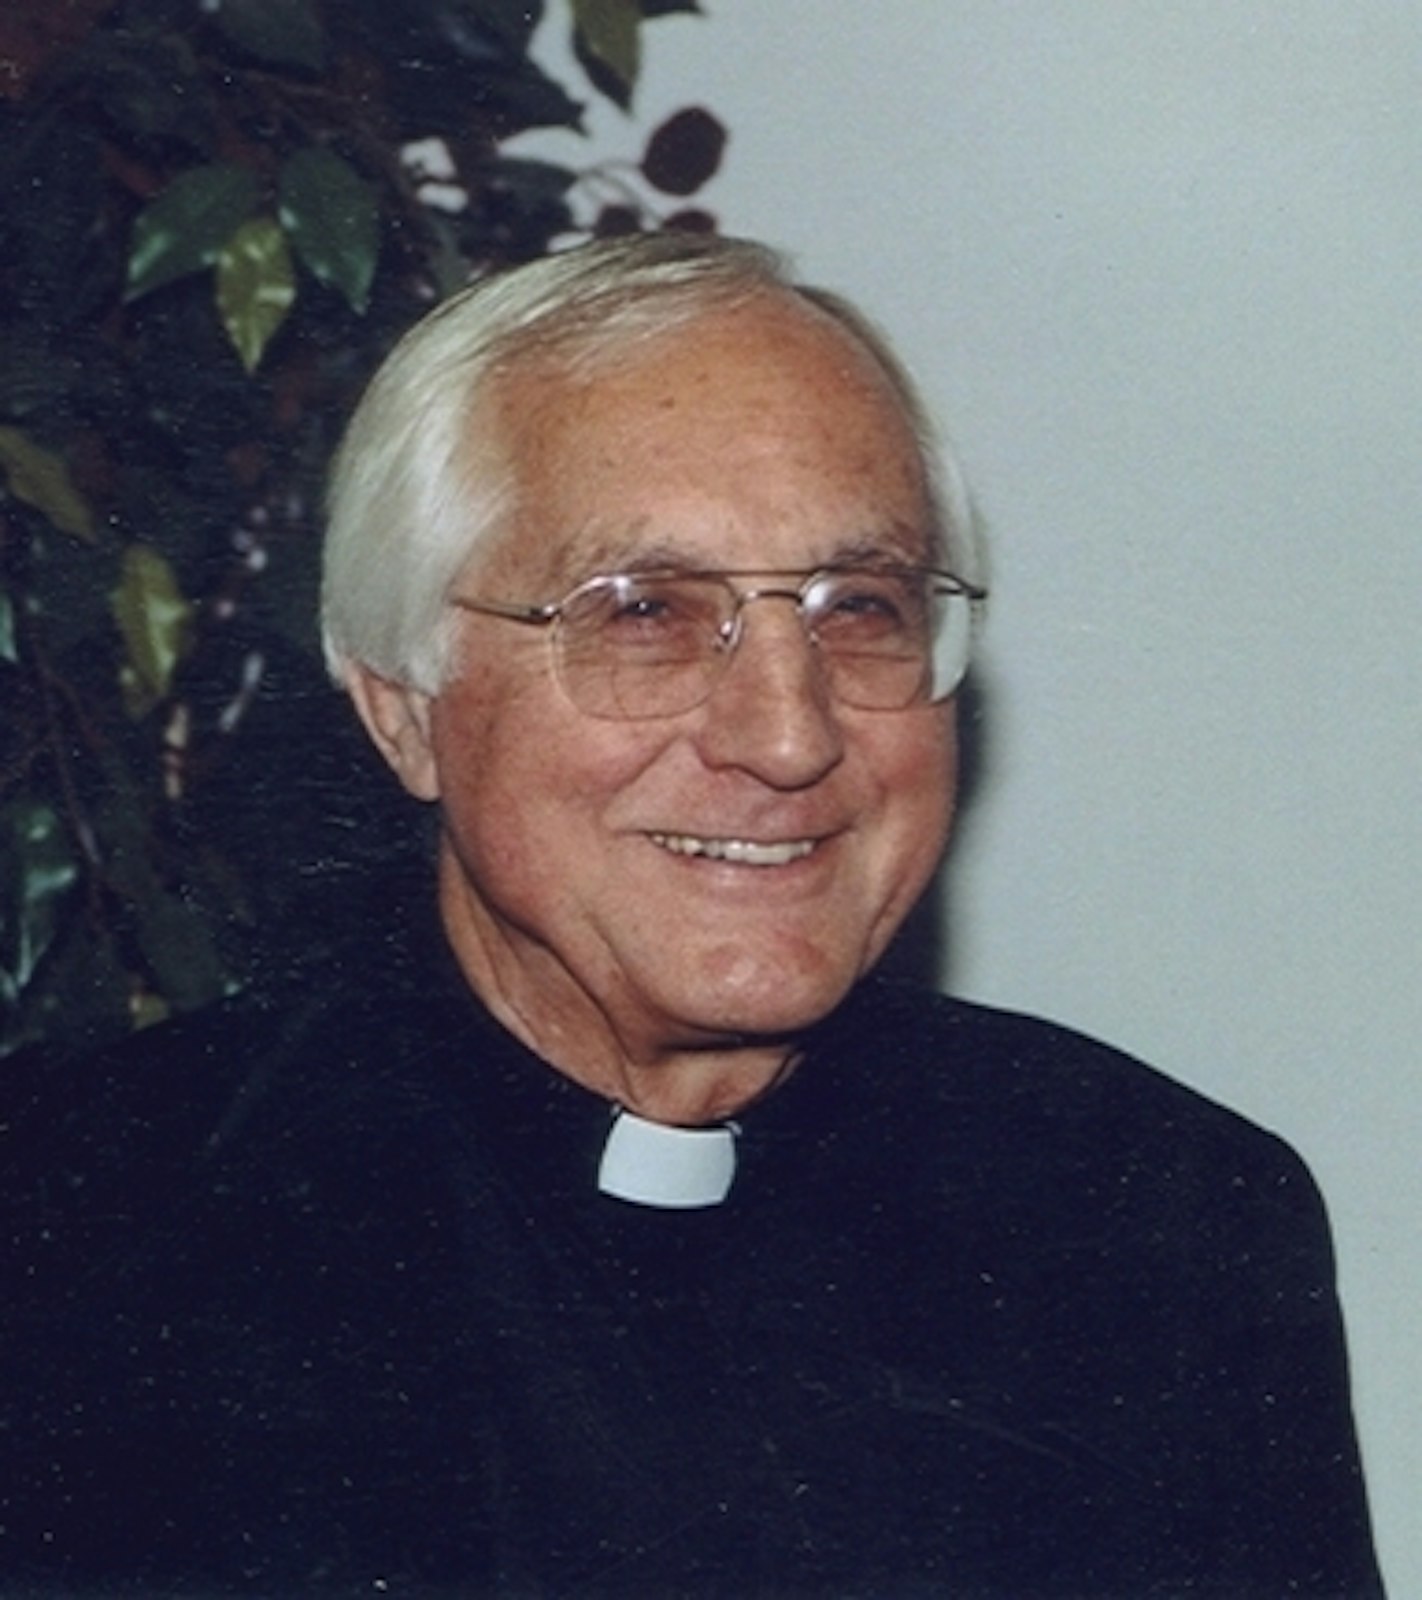 An outspoken champion of social justice causes, Bishop Gumbleton died April 4 at the age of 94. (File photo)